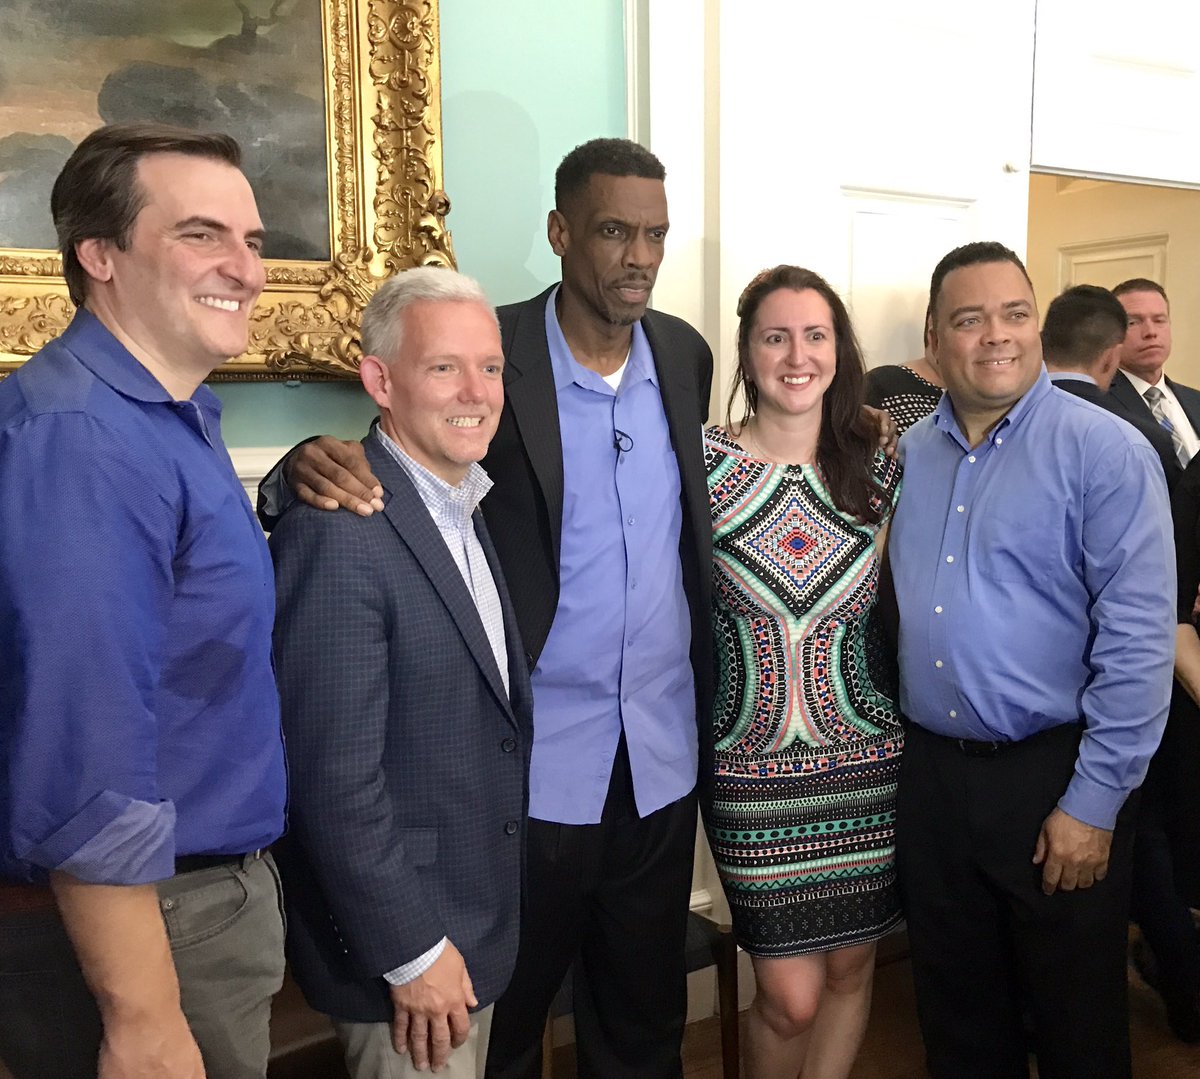 2017-05-01 Rozic Meets '86 Mets at City Hall (2)